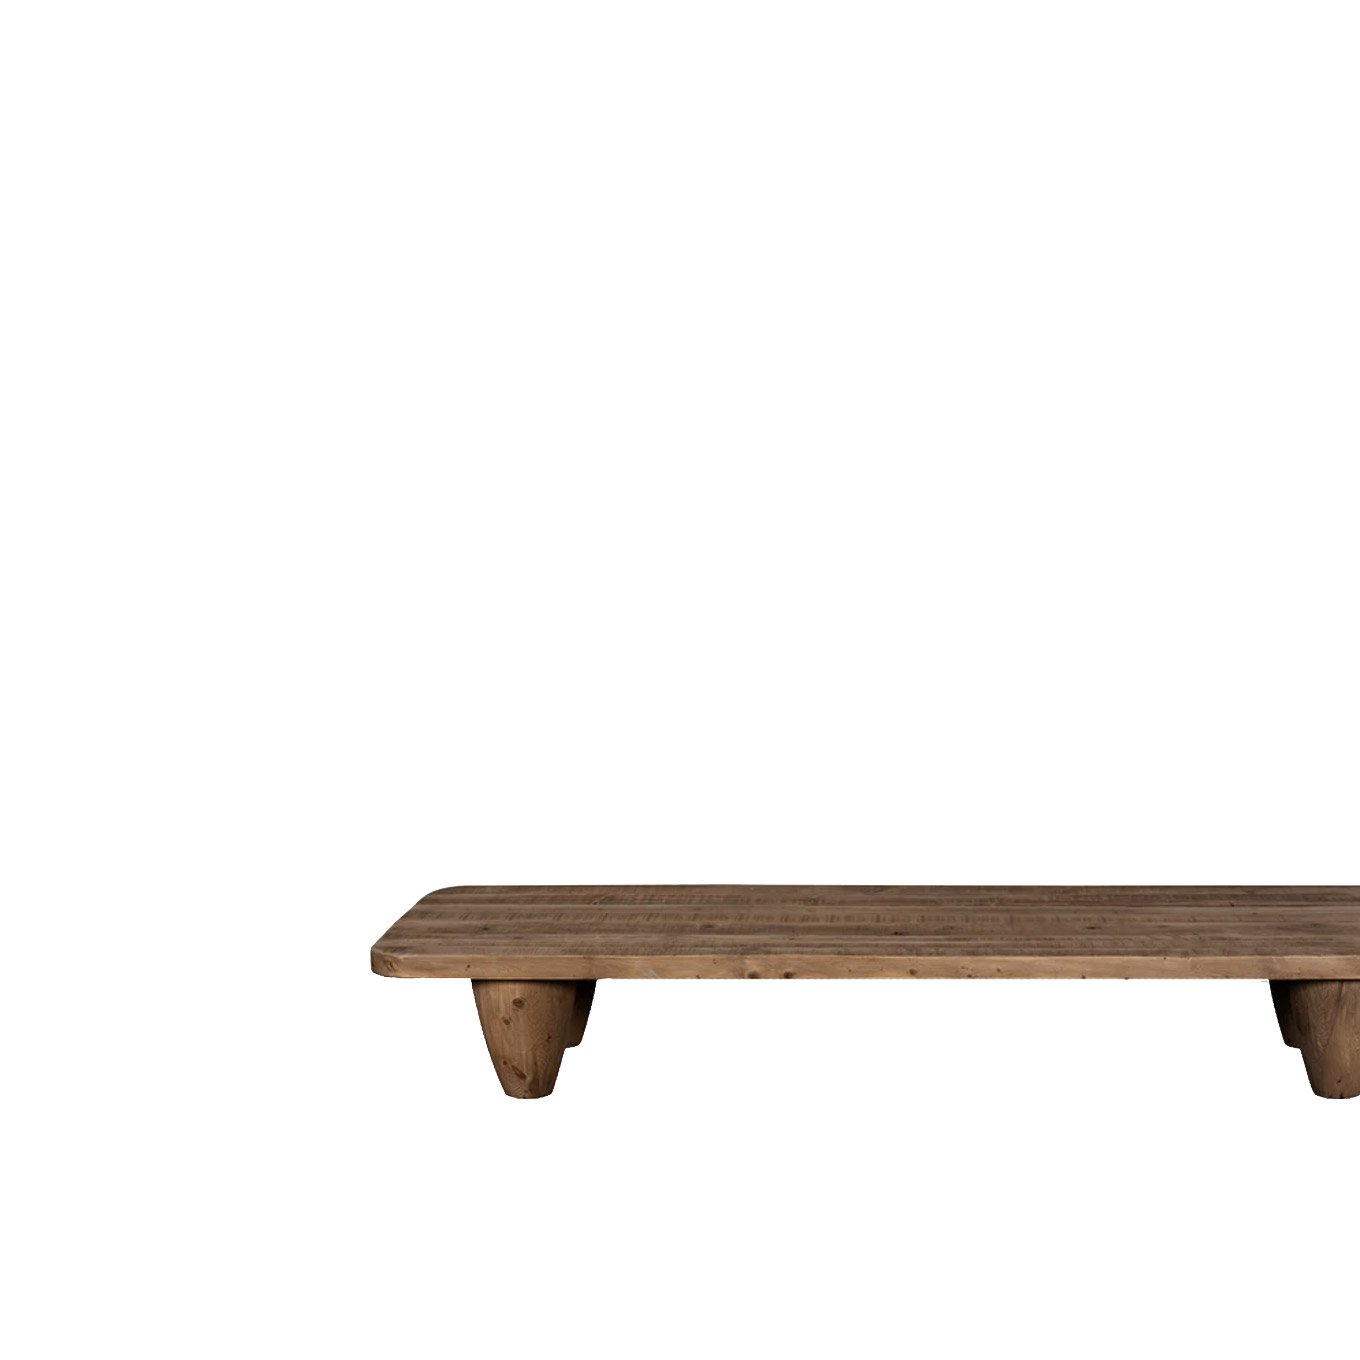 Theo Coffee Table featured in Hunker